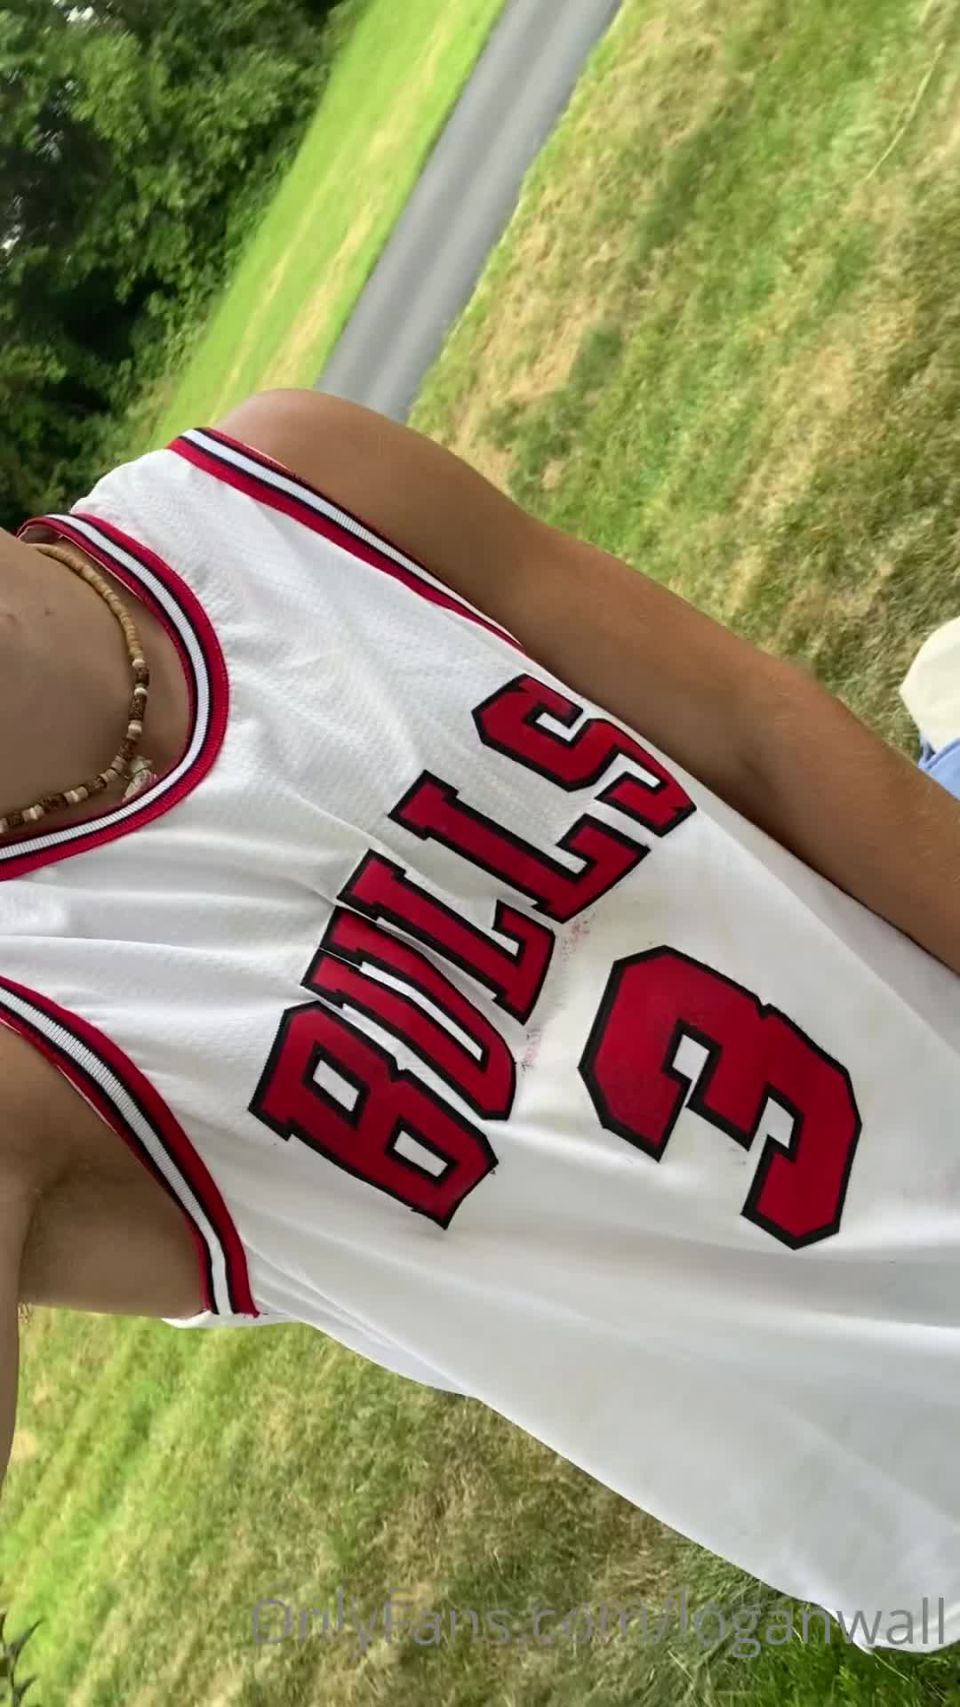 Loganwall () - rockin the bulls jersey today oh yeah and im rock out with my cock out too 01-08-2020